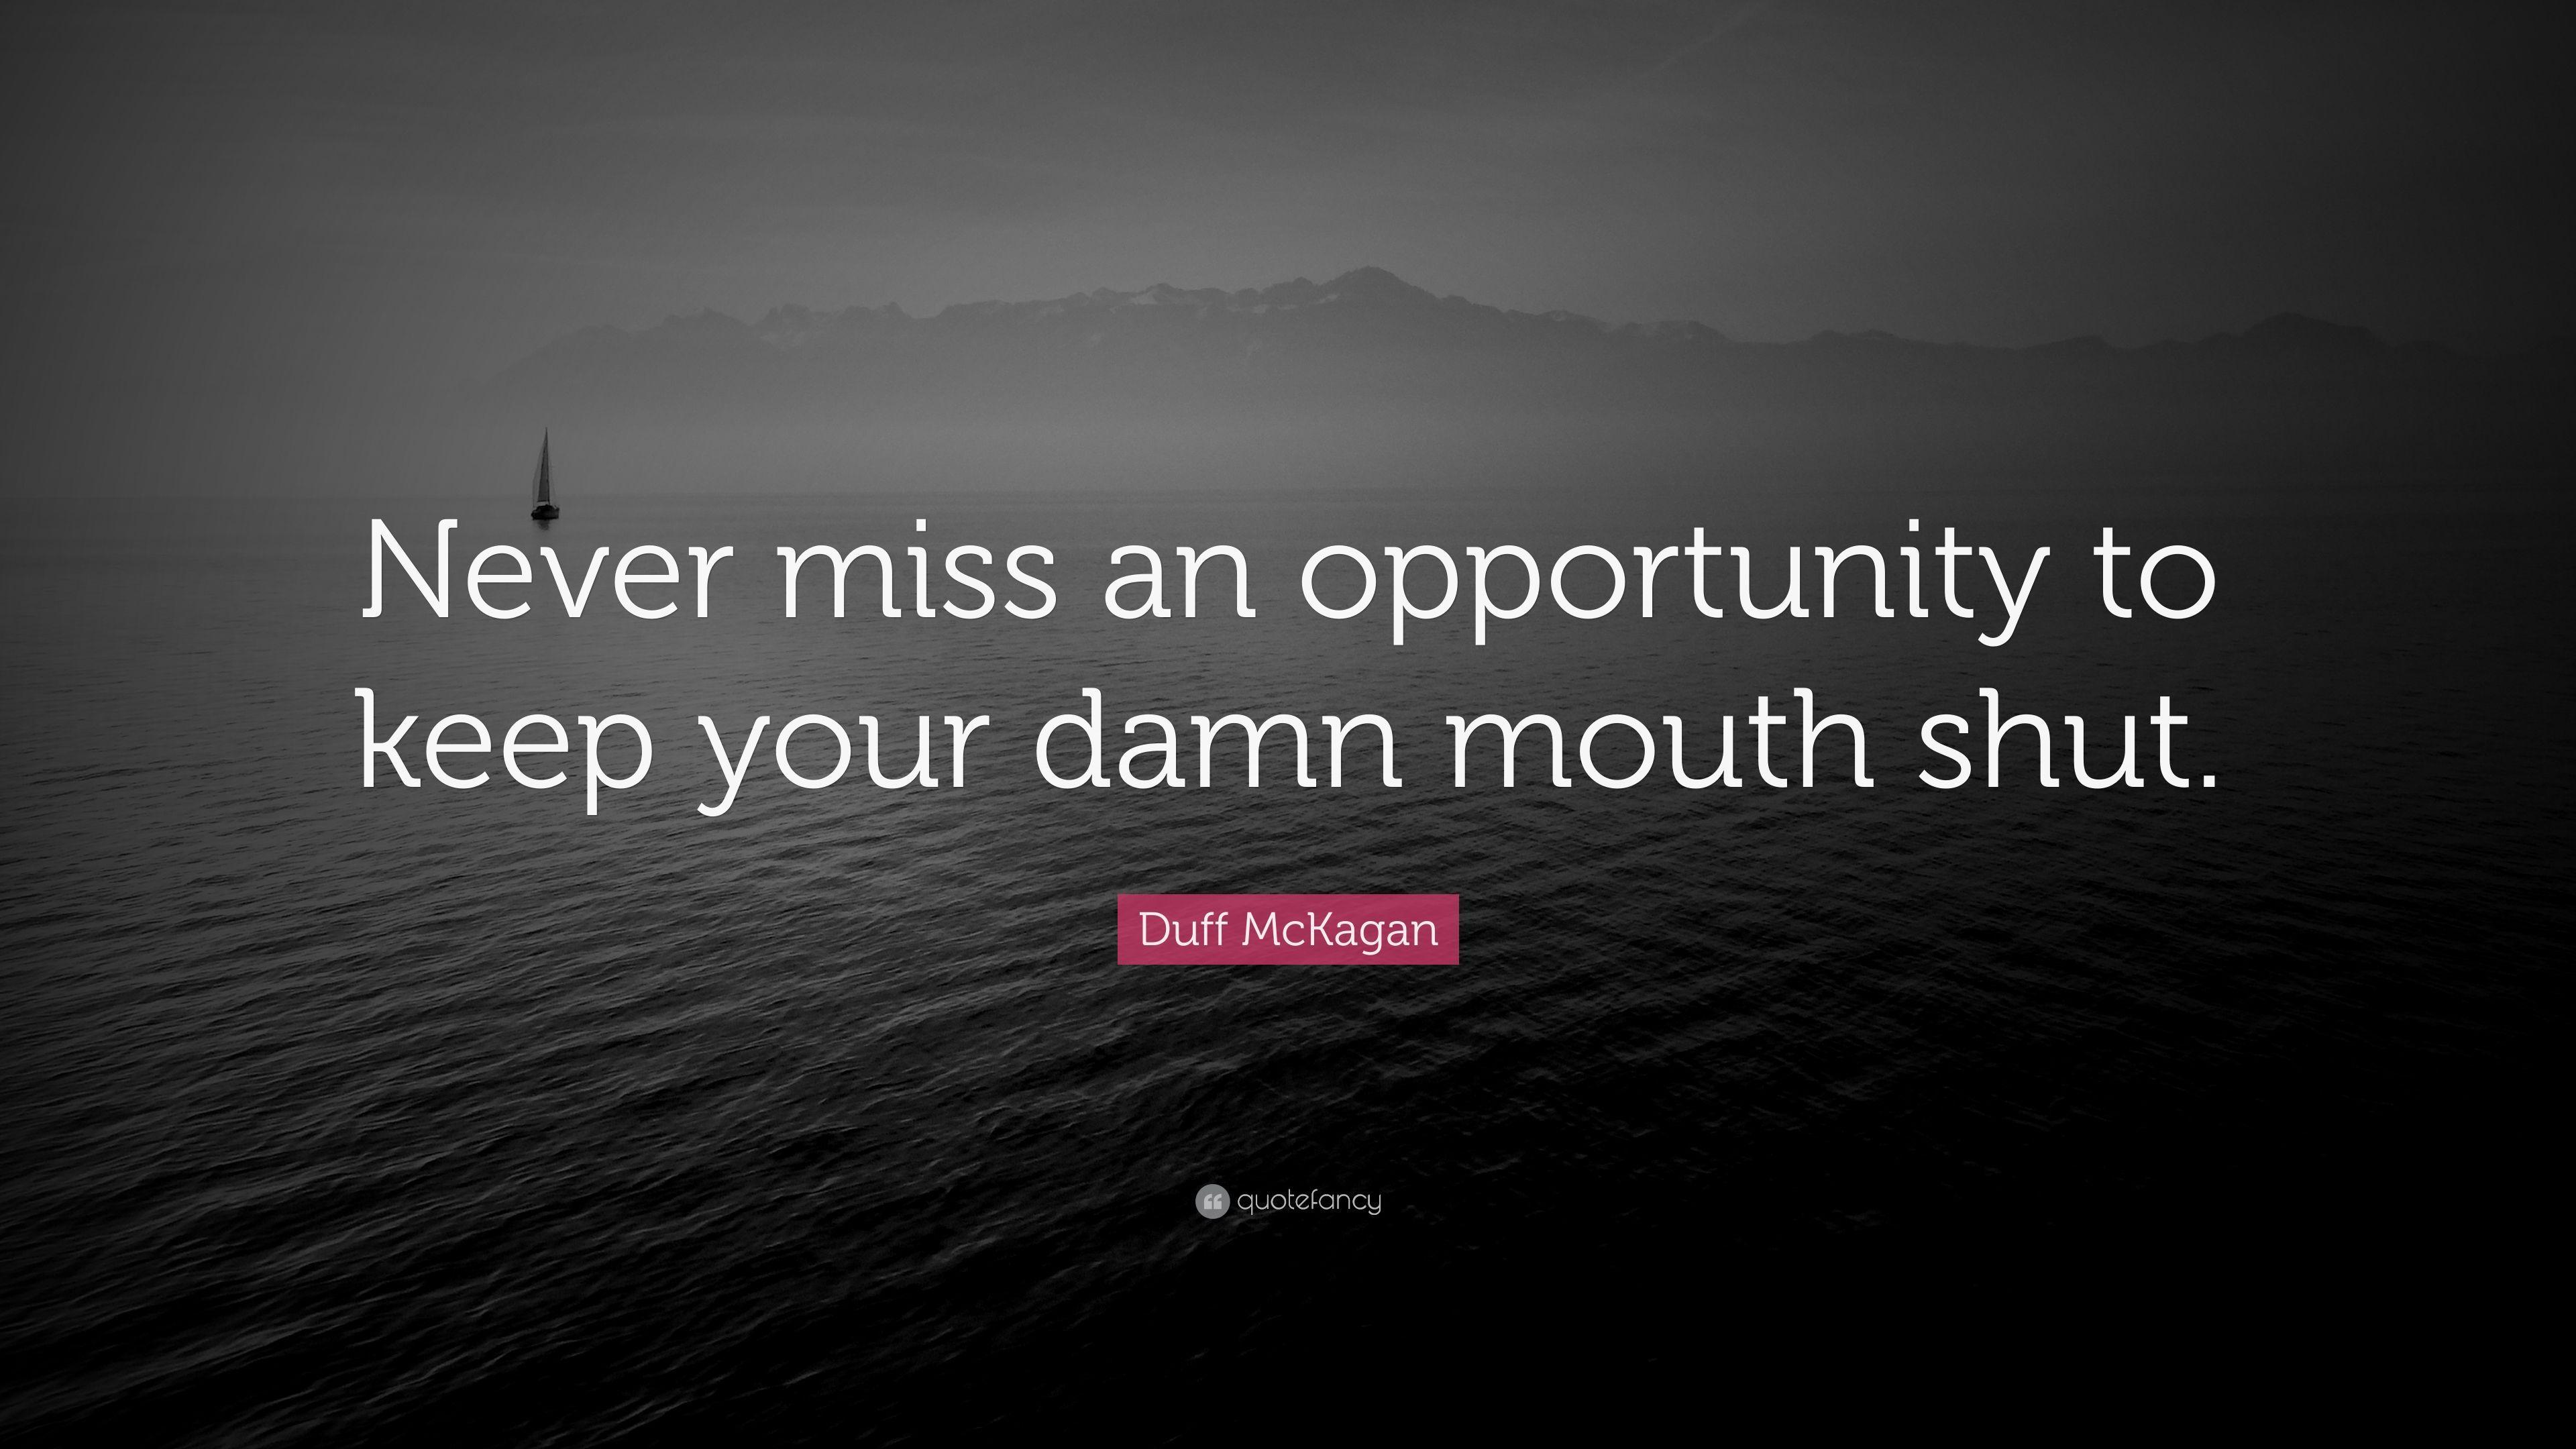 Duff McKagan Quote: “Never miss an opportunity to keep your damn